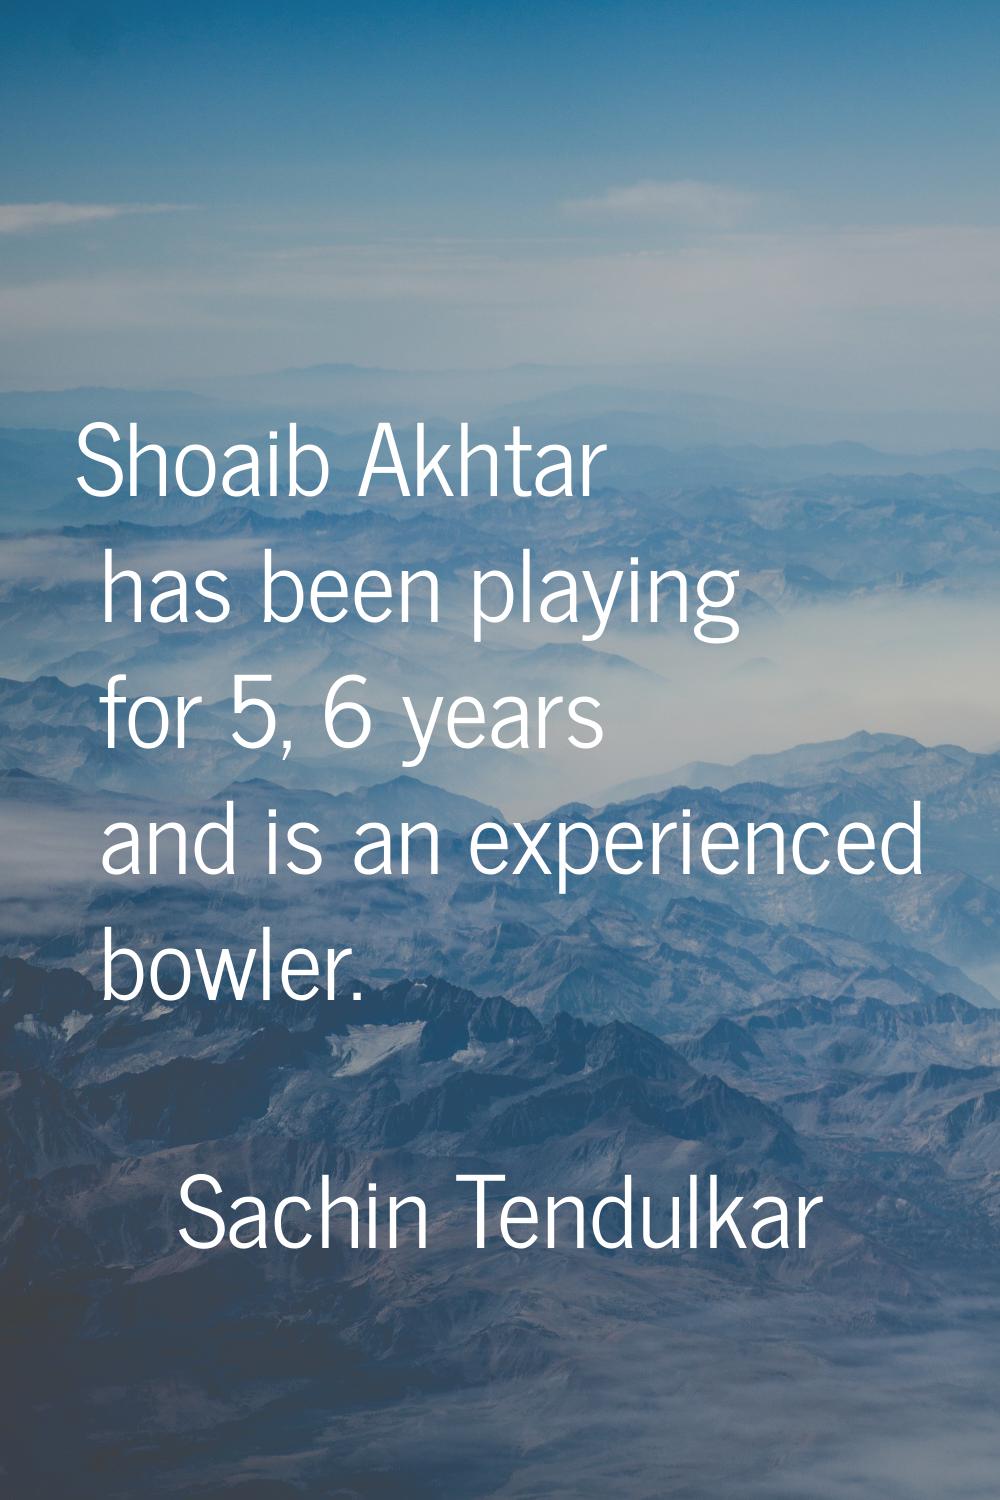 Shoaib Akhtar has been playing for 5, 6 years and is an experienced bowler.